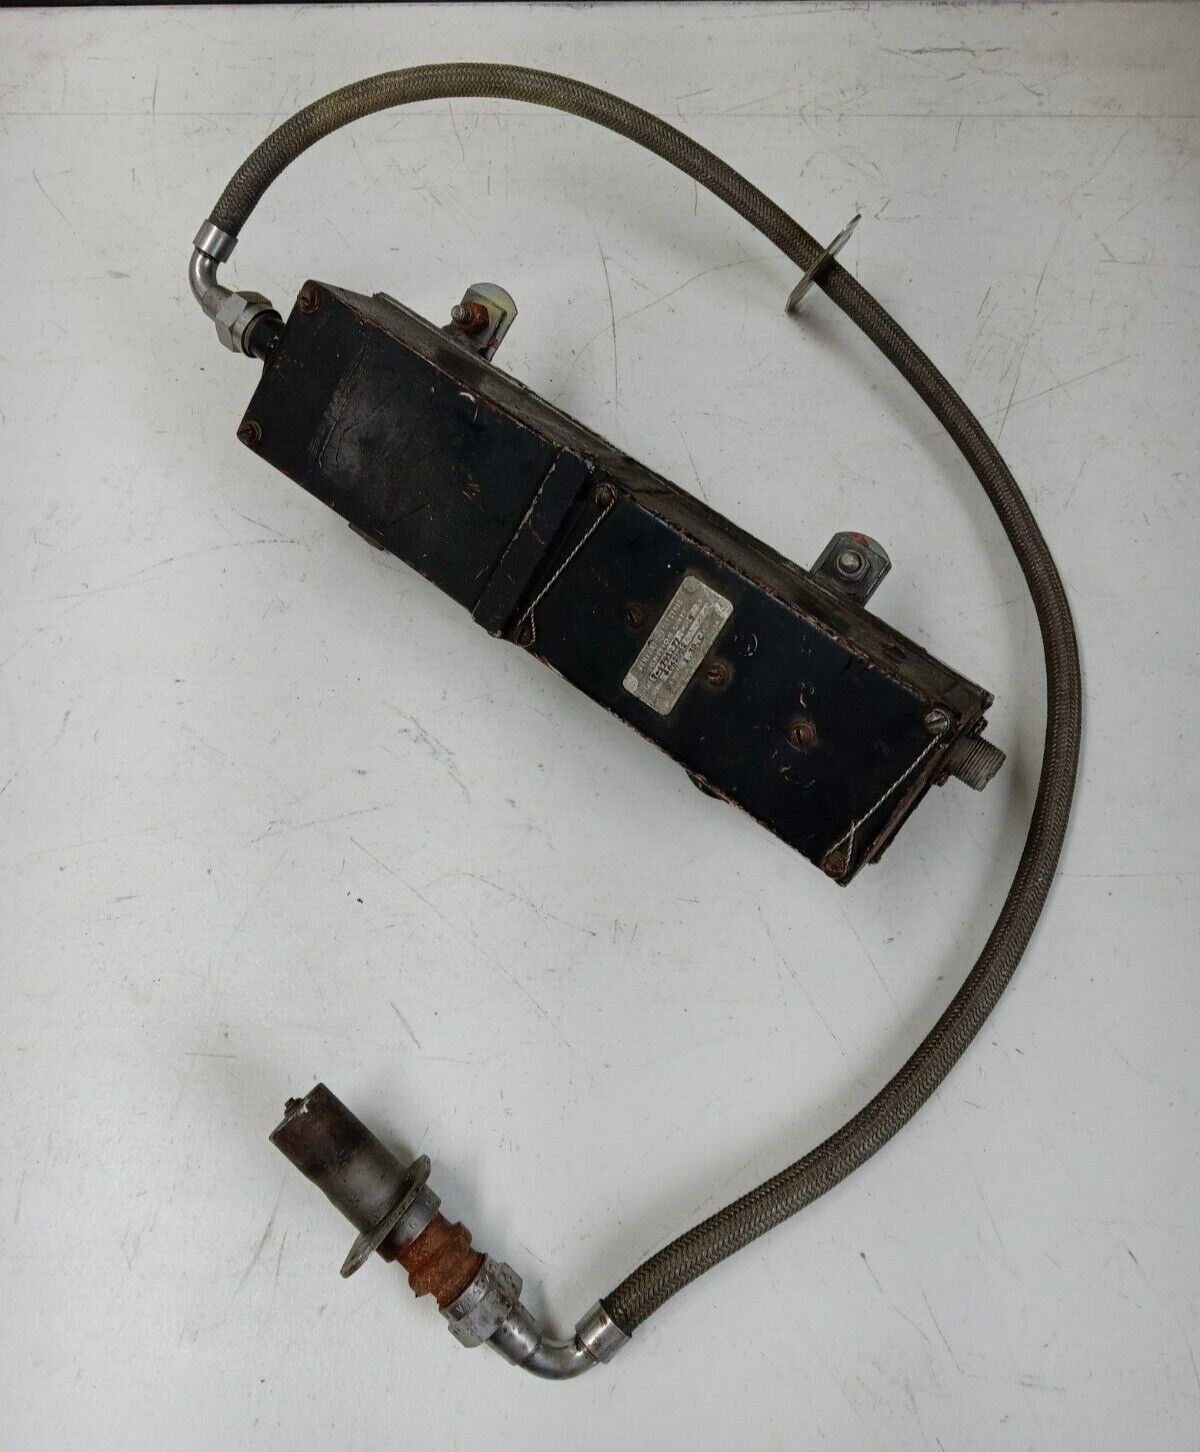 GE Ignition Unit Exciter, High Tension Wire, Ignitor Plug - Jet Turbine Engine